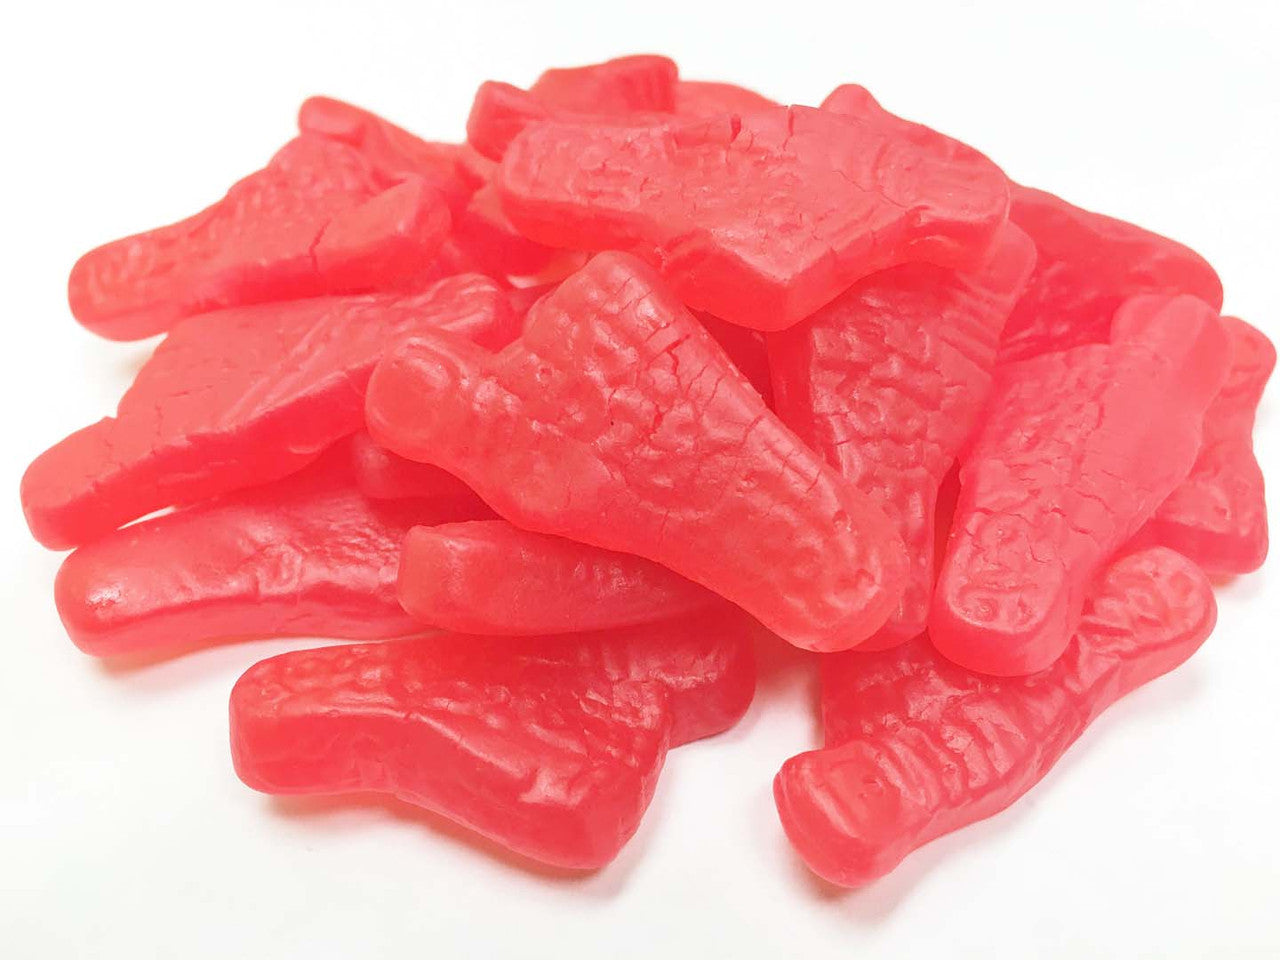 Cottage Country Big Foot Gummy Candy, 140g/4.9oz, (Imported from Canada)